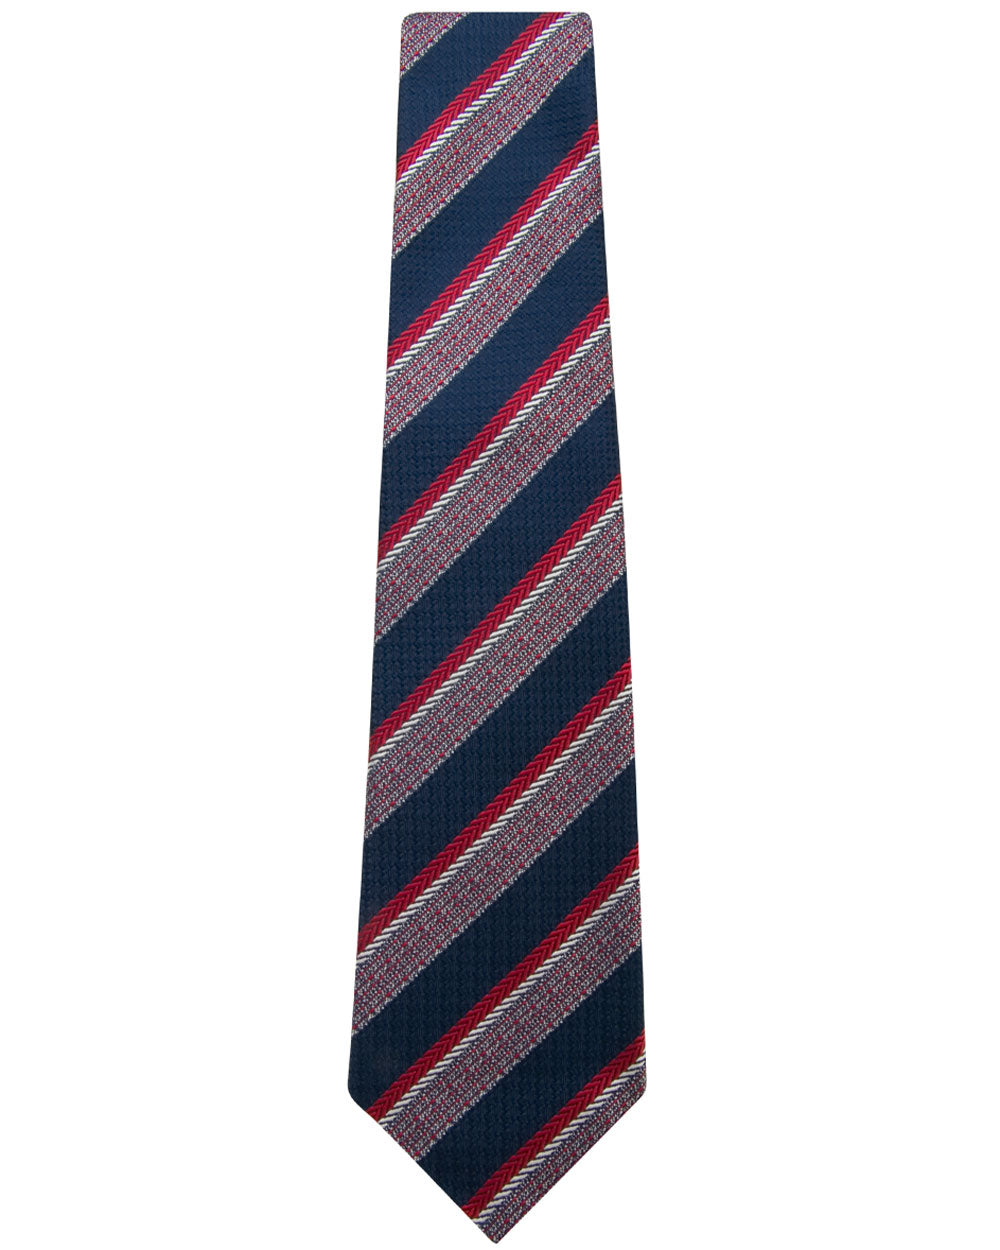 Navy Blue and Red Stripe Tie